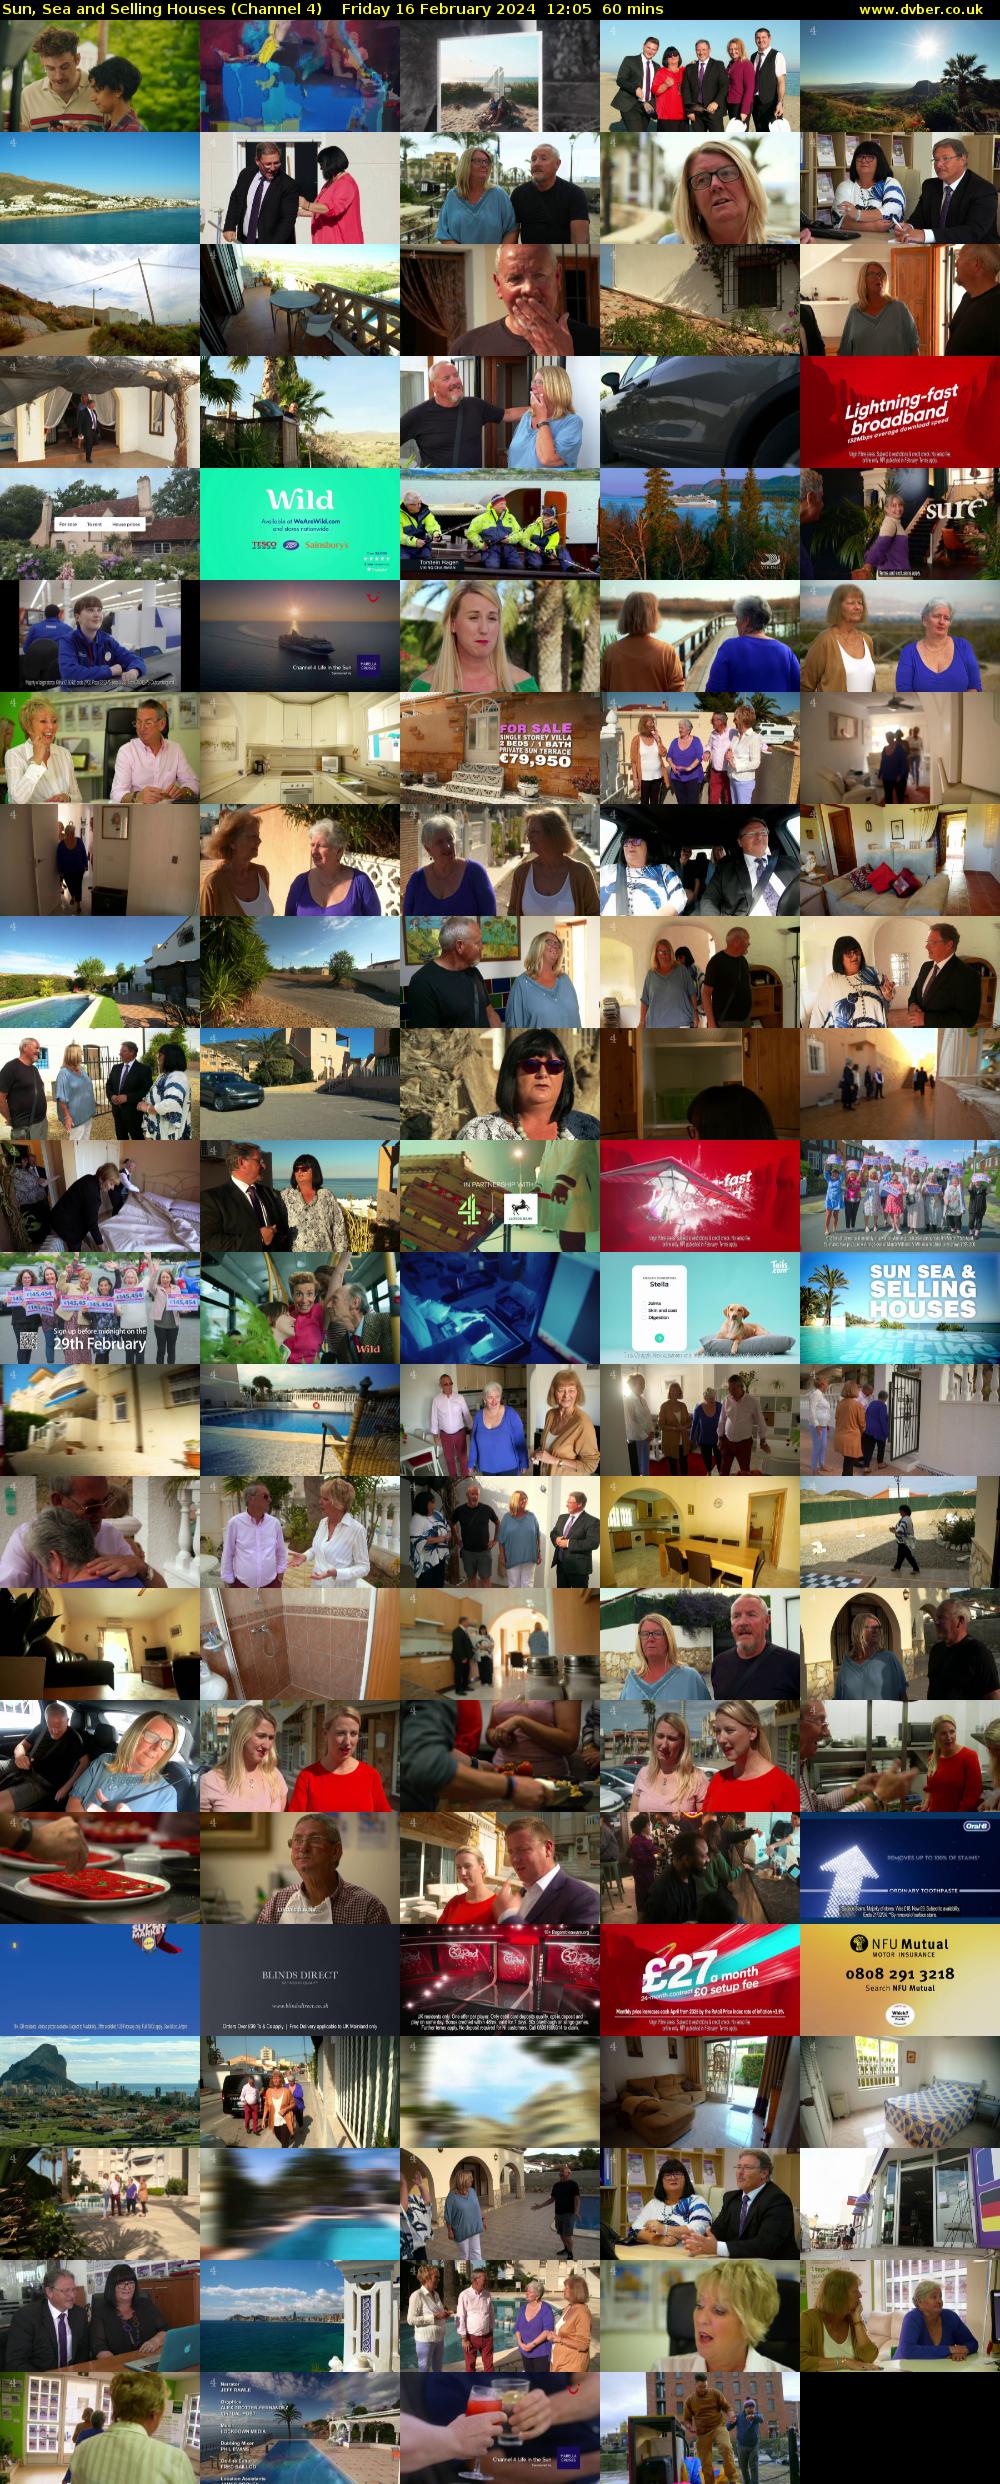 Sun, Sea and Selling Houses (Channel 4) Friday 16 February 2024 12:05 - 13:05